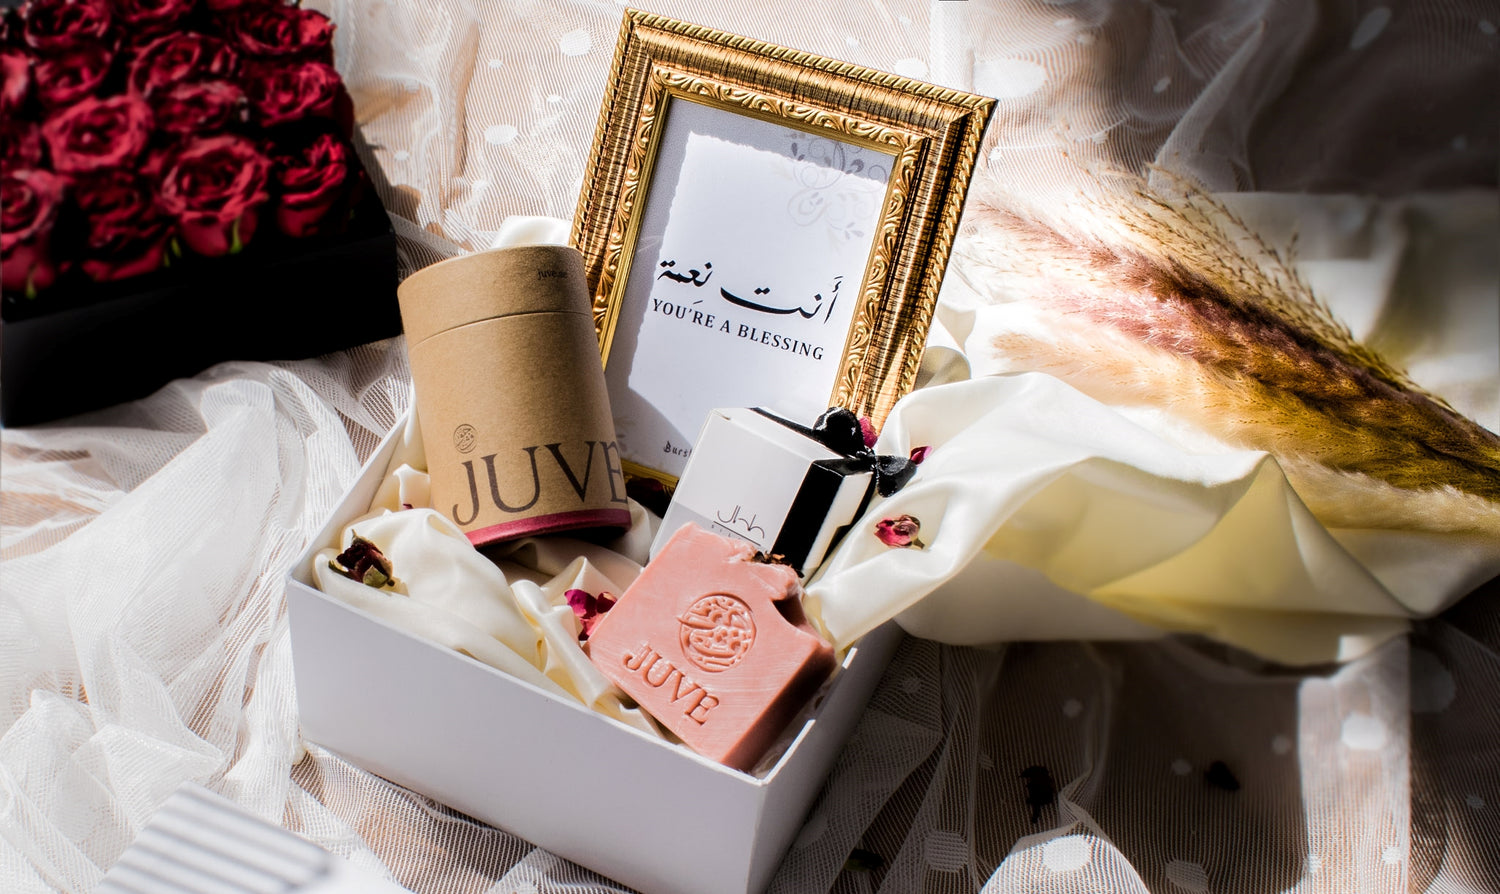 Burst of Arabia lets you build your gift box in 3 simple steps! Step 1: choose your gift items. Step 2: Select your gift box. Step 3: Add a gift message, choose delivery method. We deliver across Dubai & UAE. 2 hour delivery is available across Dubai.